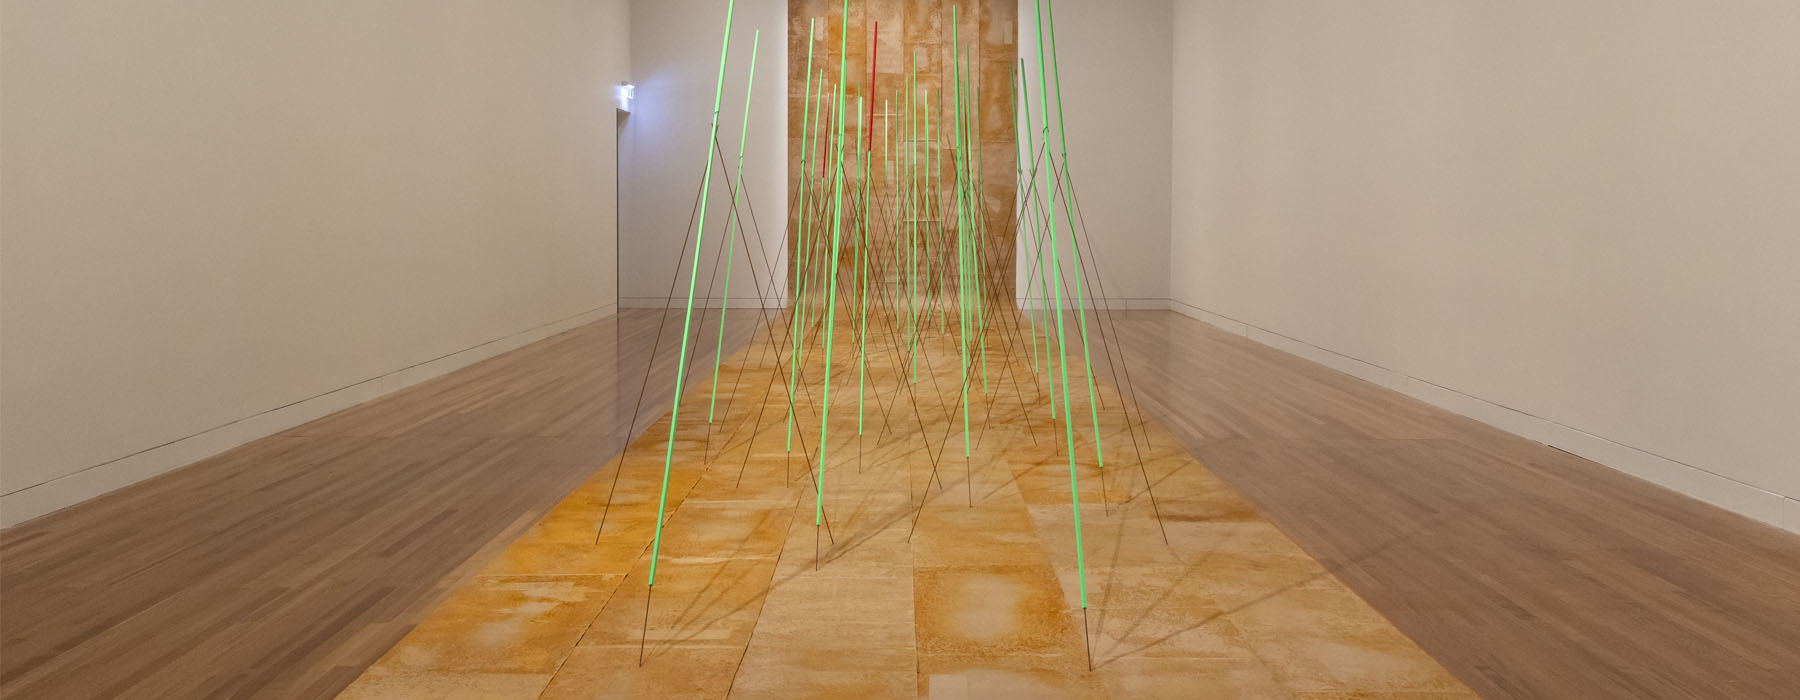 Installation view of the artwork “Extensum/Extensor”. It comprises of a long sheet of rusted paper which hangs from the ceiling and rolls out across the floor. On the floor part of the paper, thins rods in floor green stick out, like hairs